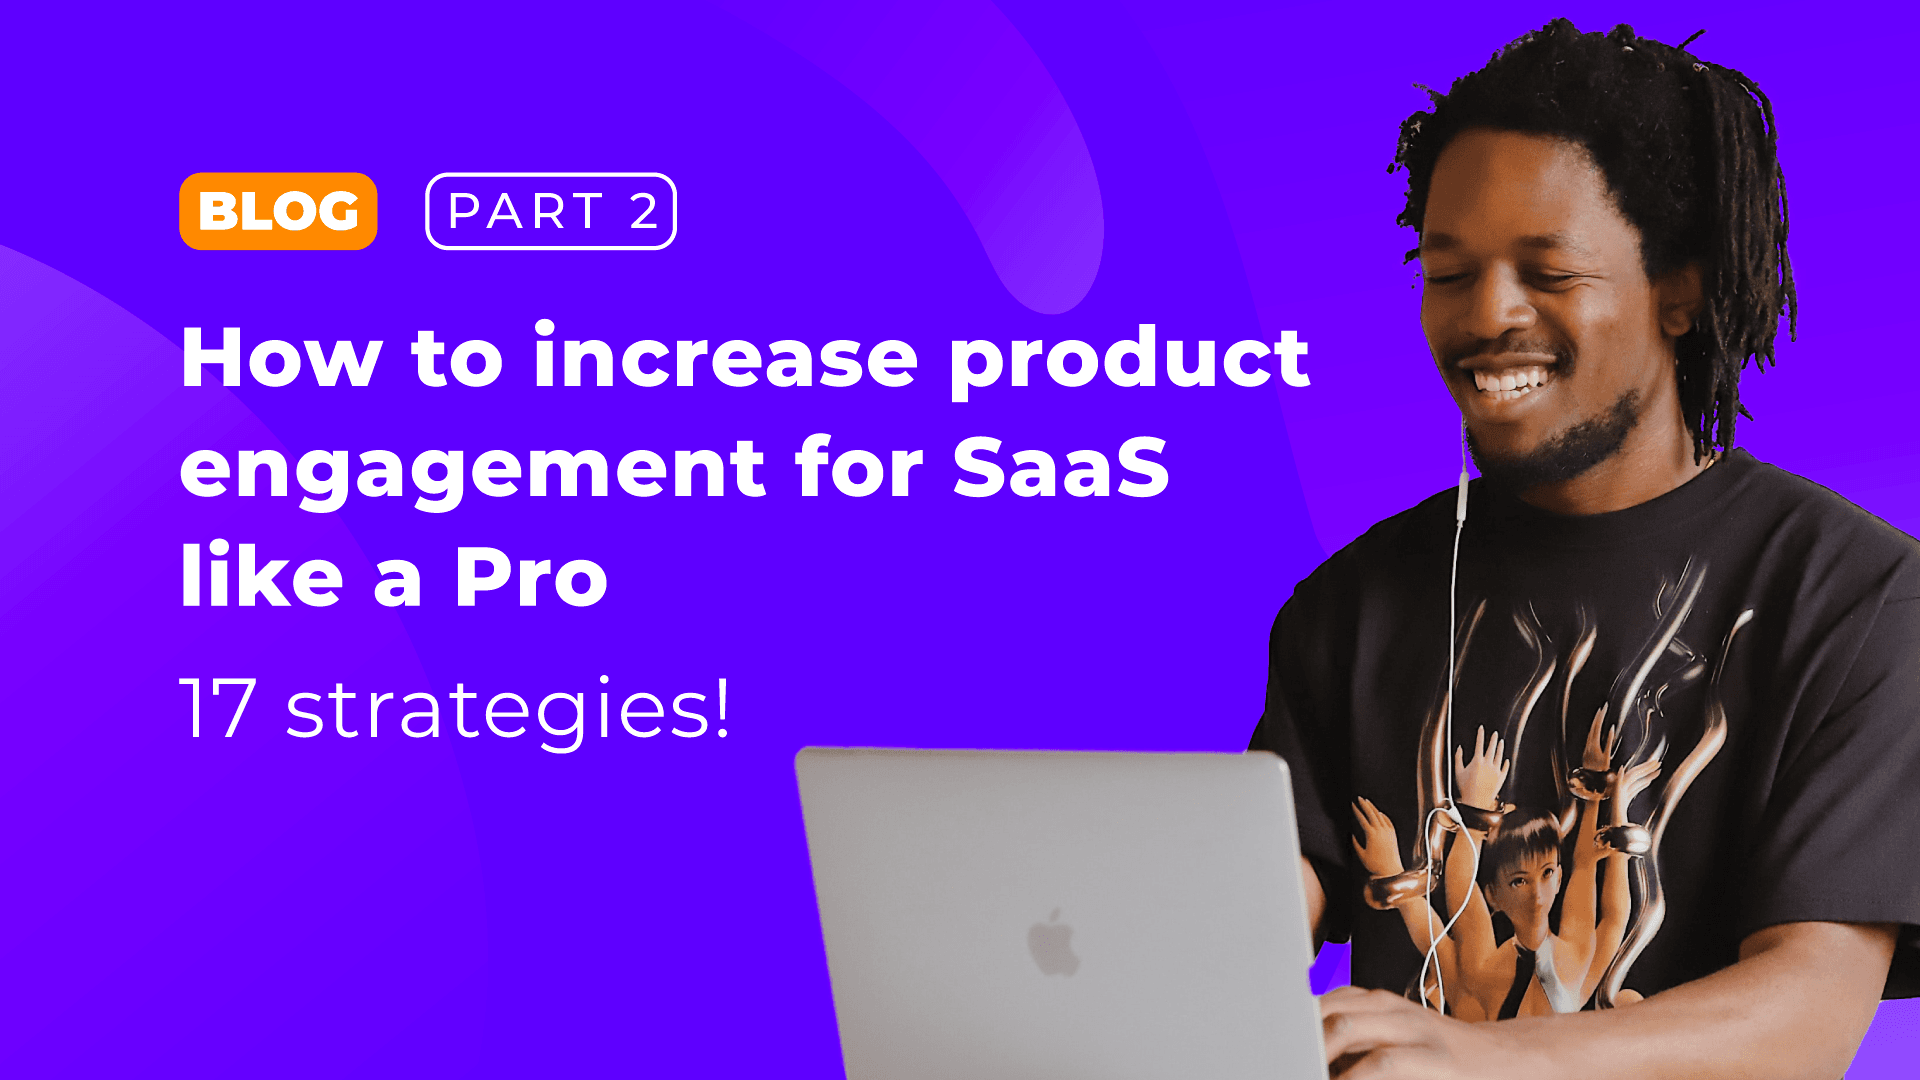 How to increase product engagement for SaaS like a Pro: Part 2 - 17 Strategies! cover